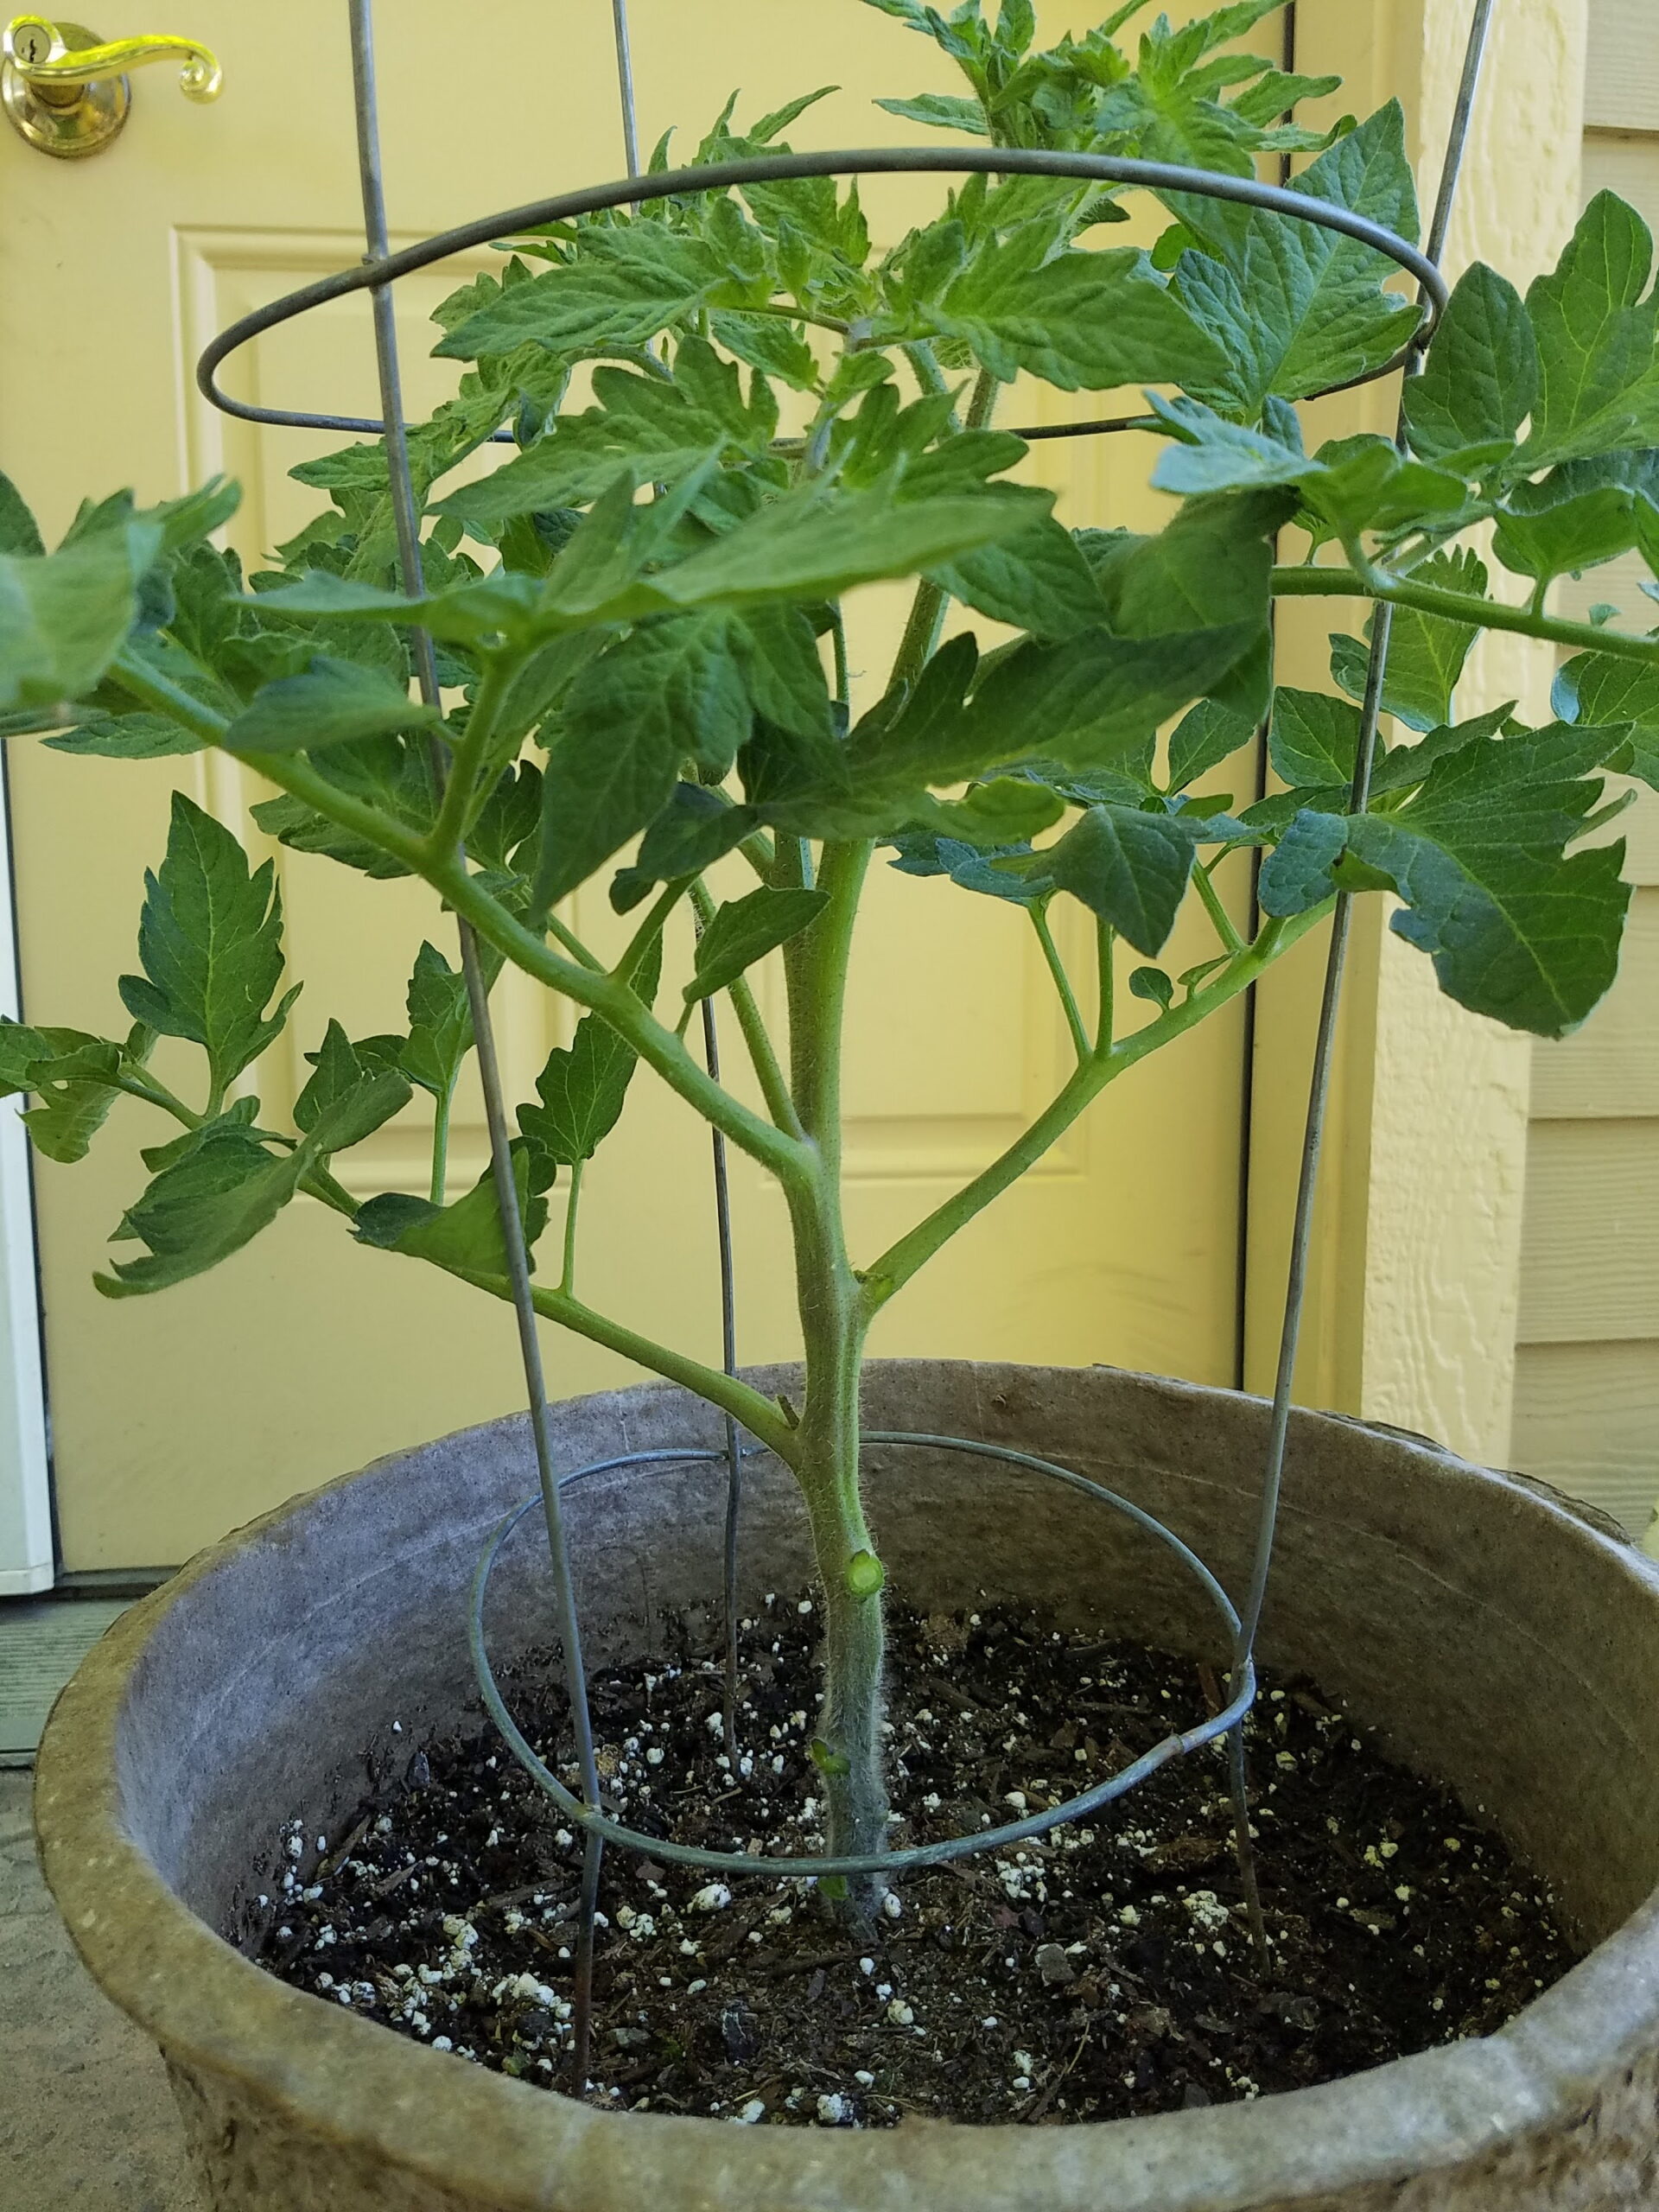 Pruned tomato plant | The Coeur d Alene Coop